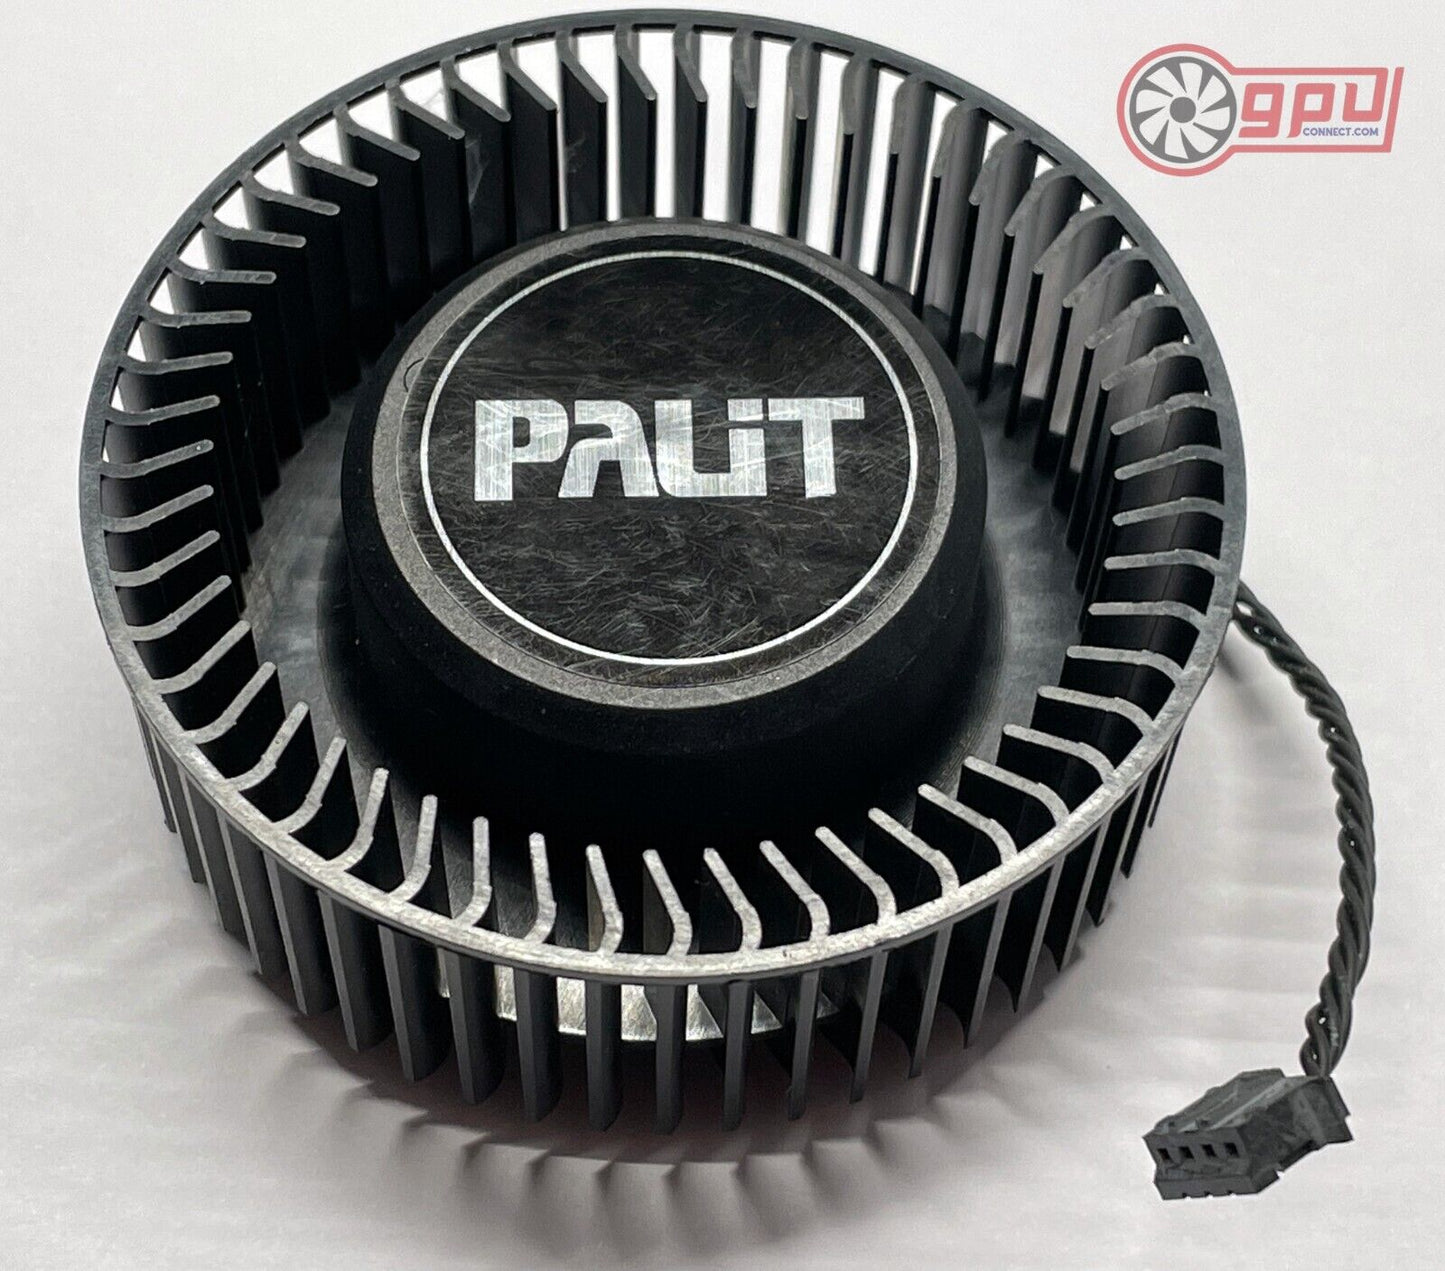 PALIT RTX 2070 2080 Ti SUPER Blower Style Replacement Graphics Card Fan (4 Pin) - GPUCONNECT.COM